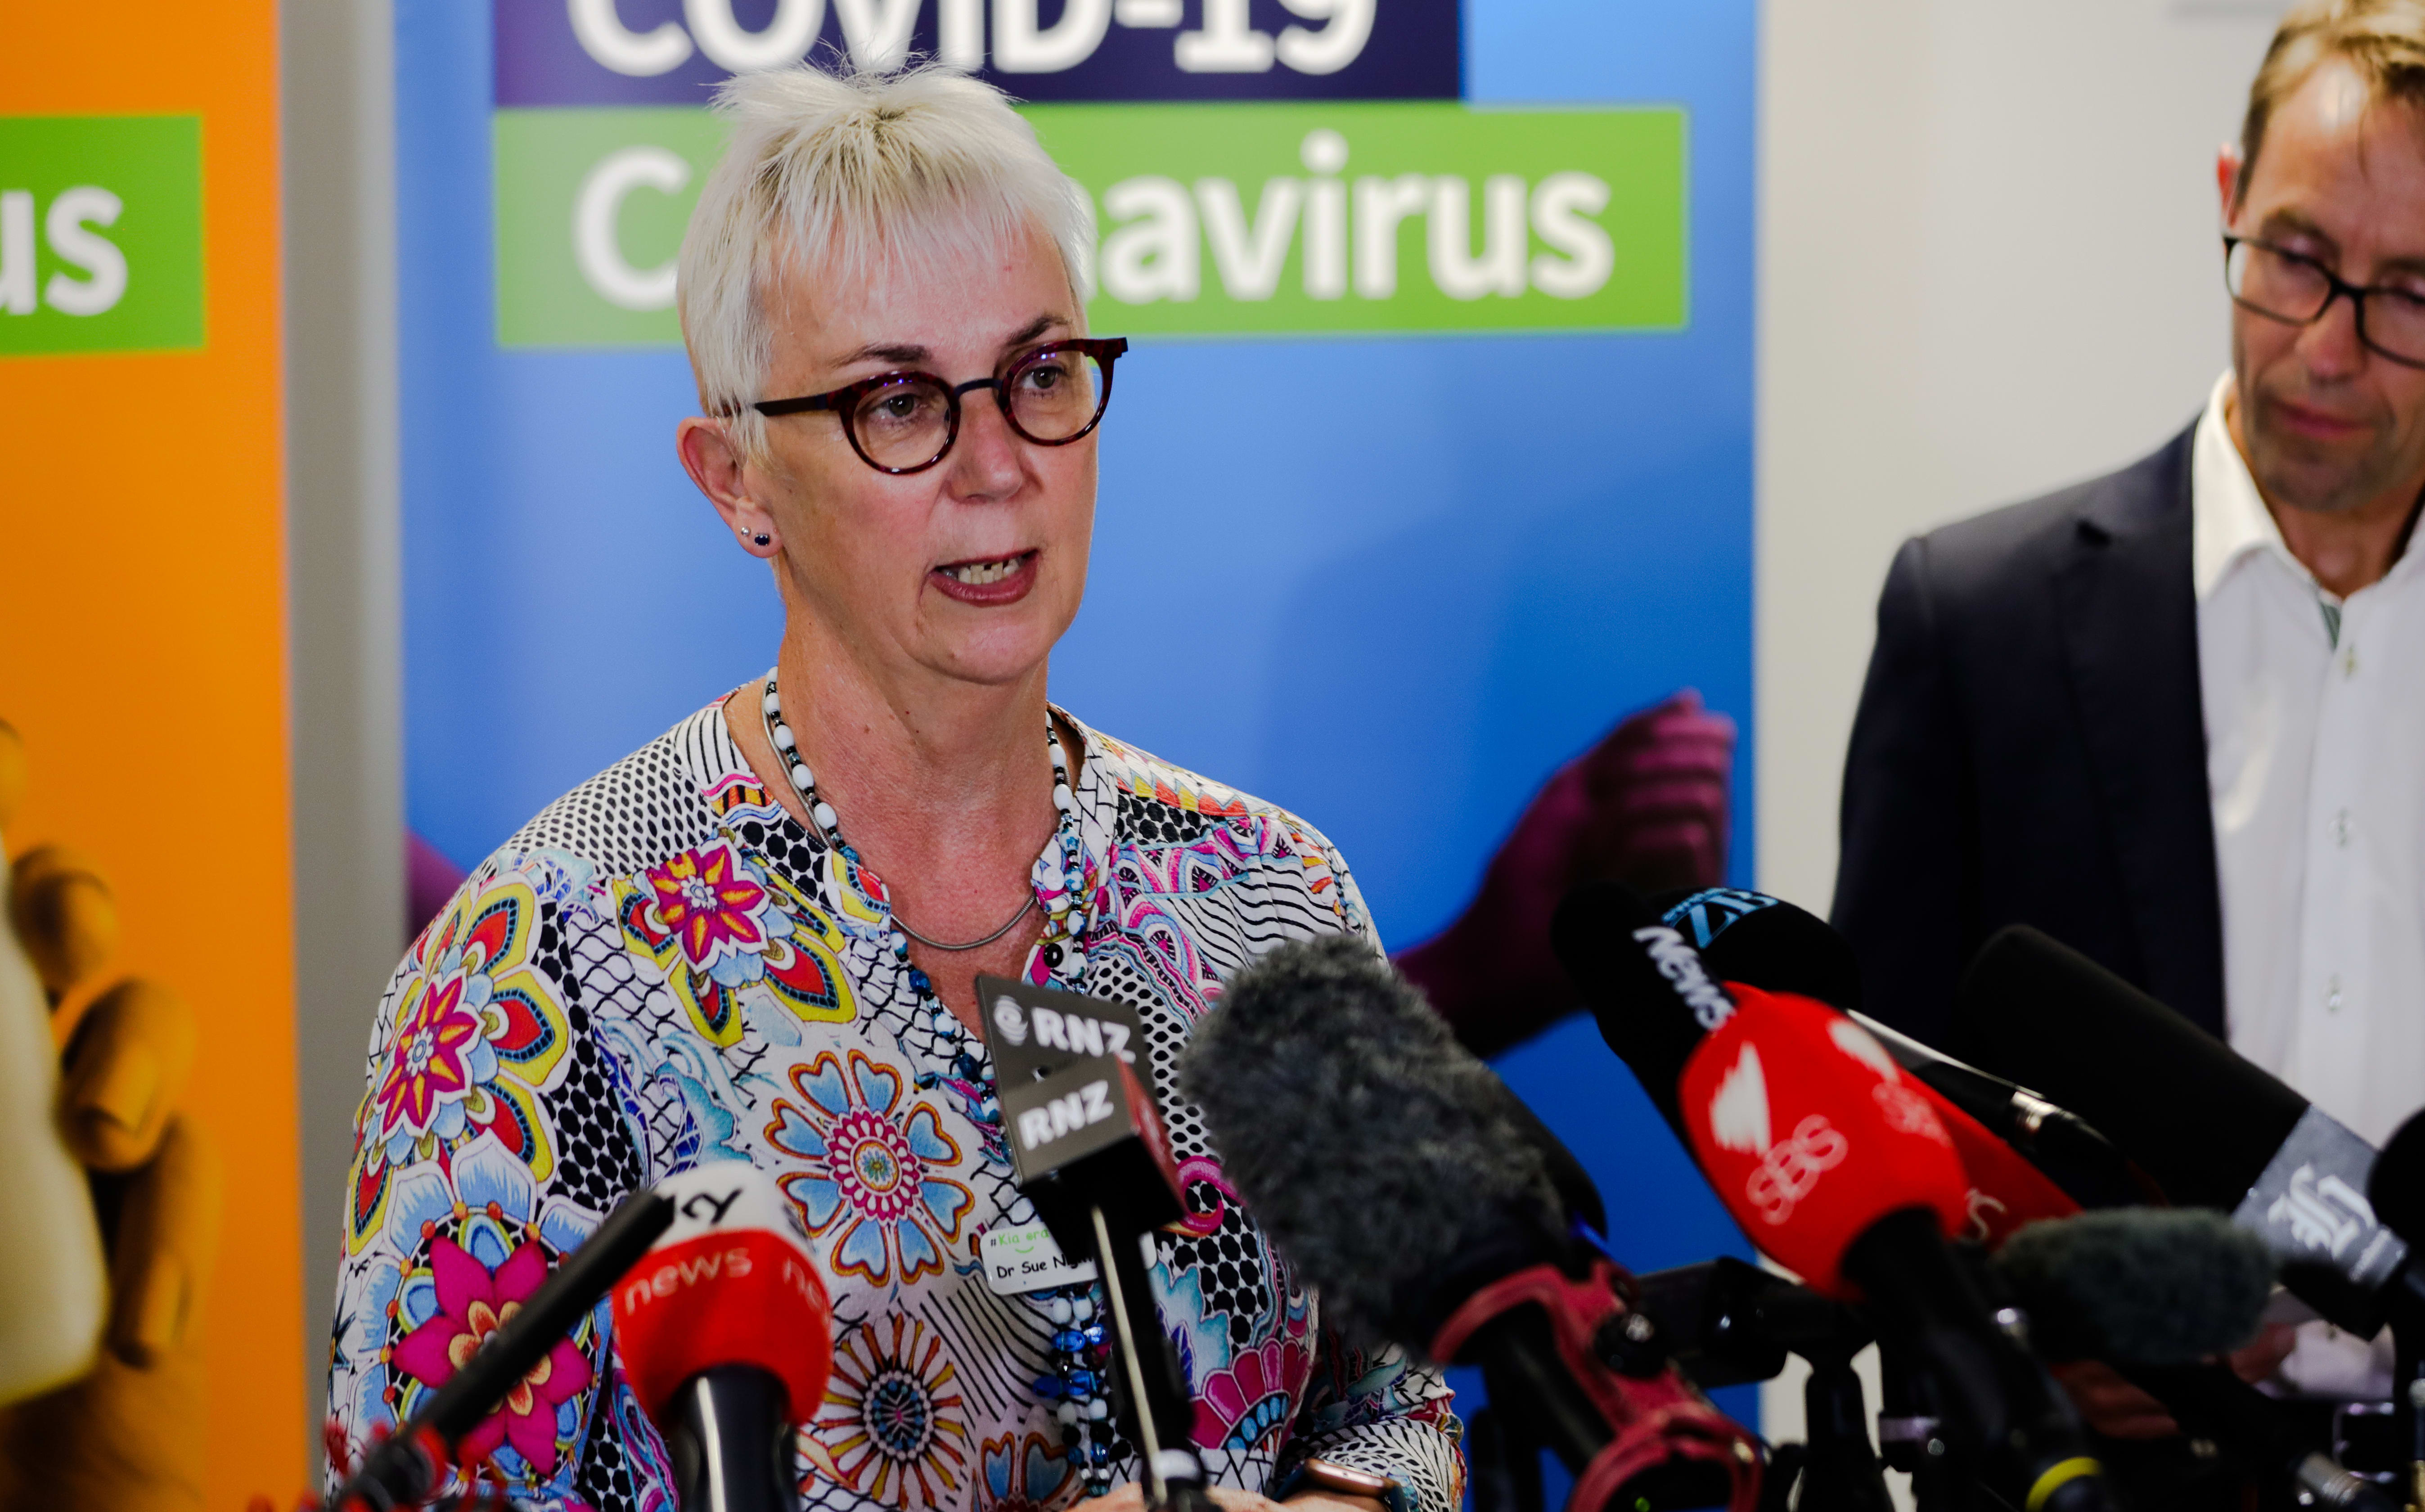 Canterbury DHB chief medical officer Dr Sue Nightingale and Director-General of Health Ashley Bloomfield who confirmed eight cases of Covid 19 at a press conference in Christchurch.